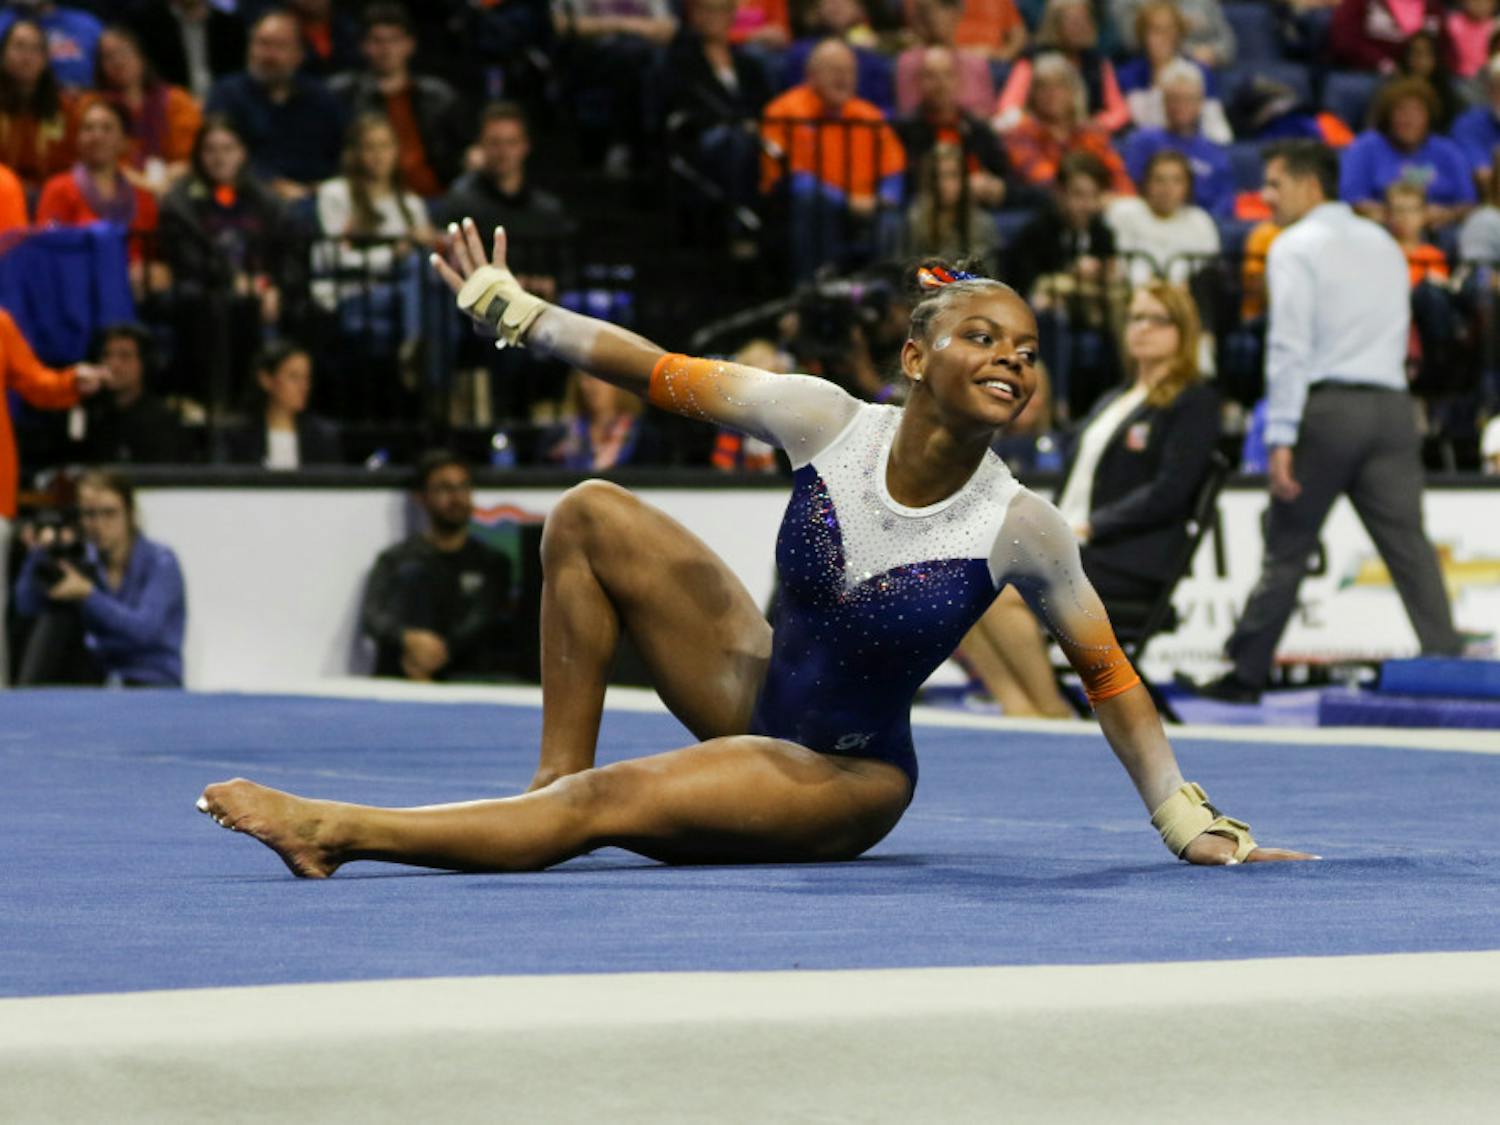 Freshman gymnast Trinity Thomas will compete on the bars and floor events at the NCAA Championships in Fort Worth, Texas, on Friday.